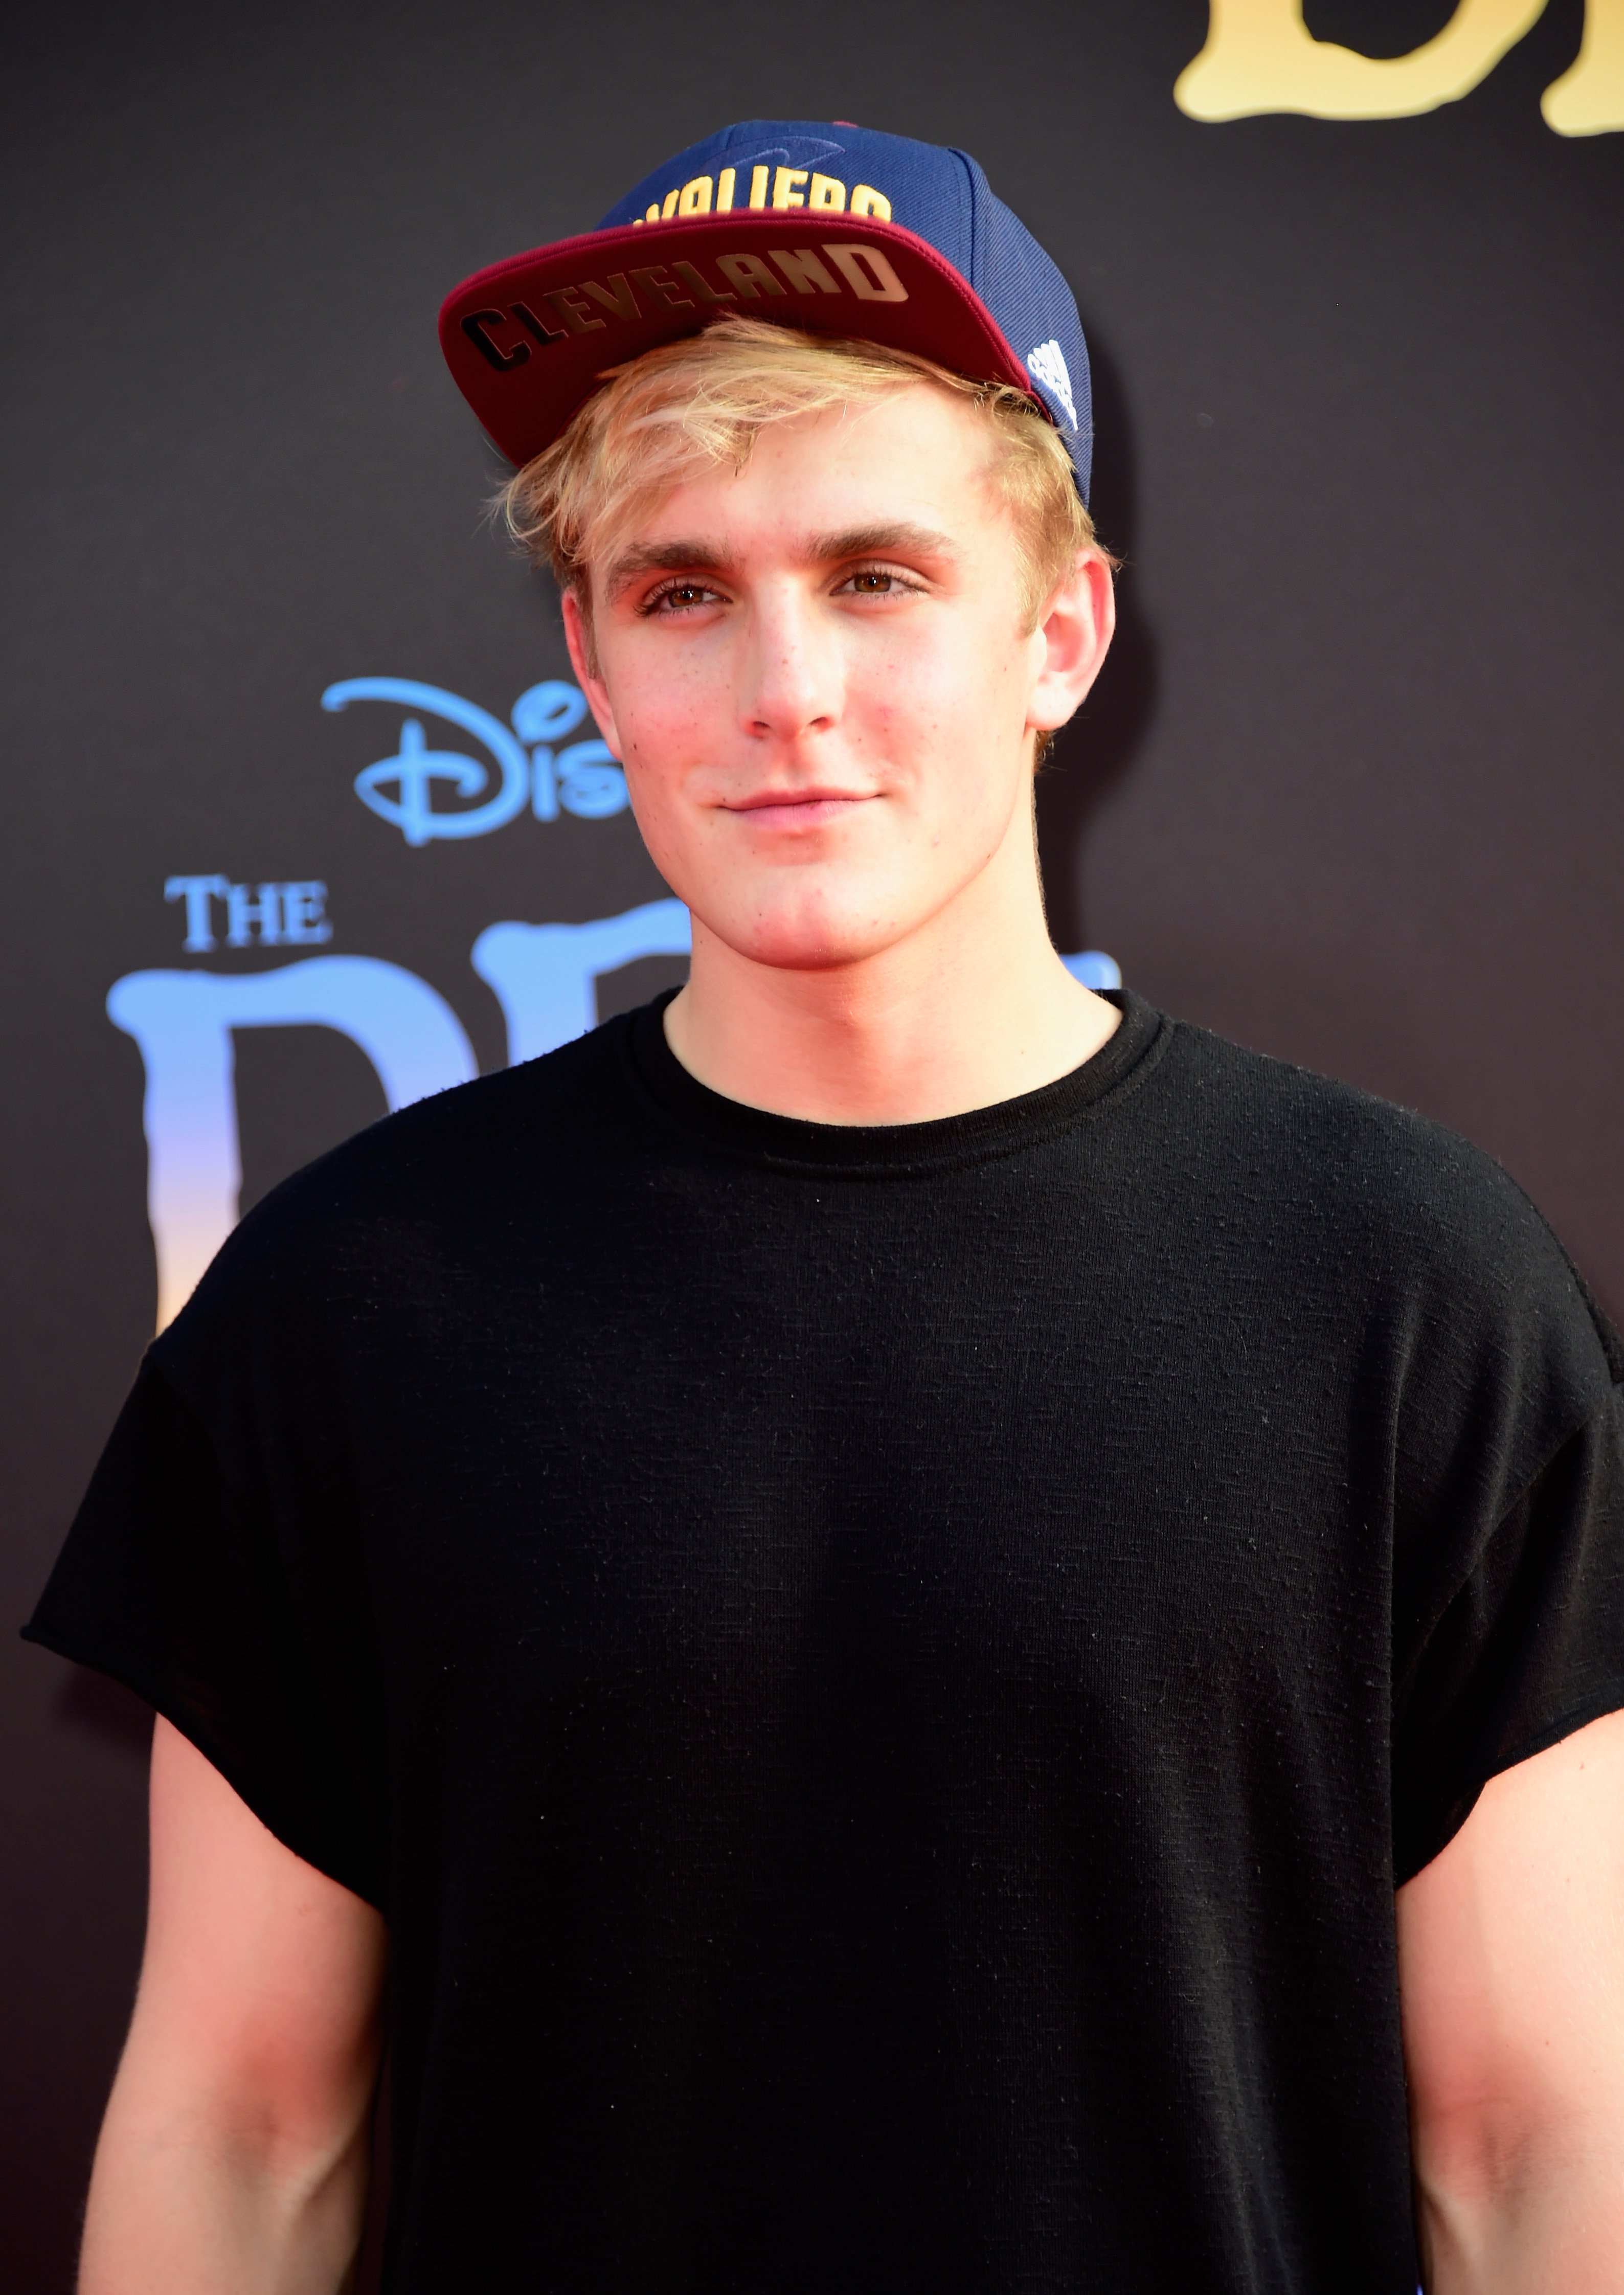 Jake Paul attends Disney's 'The BFG' premiere at the El Capitan Theatre on June 21, 2016 in Hollywood